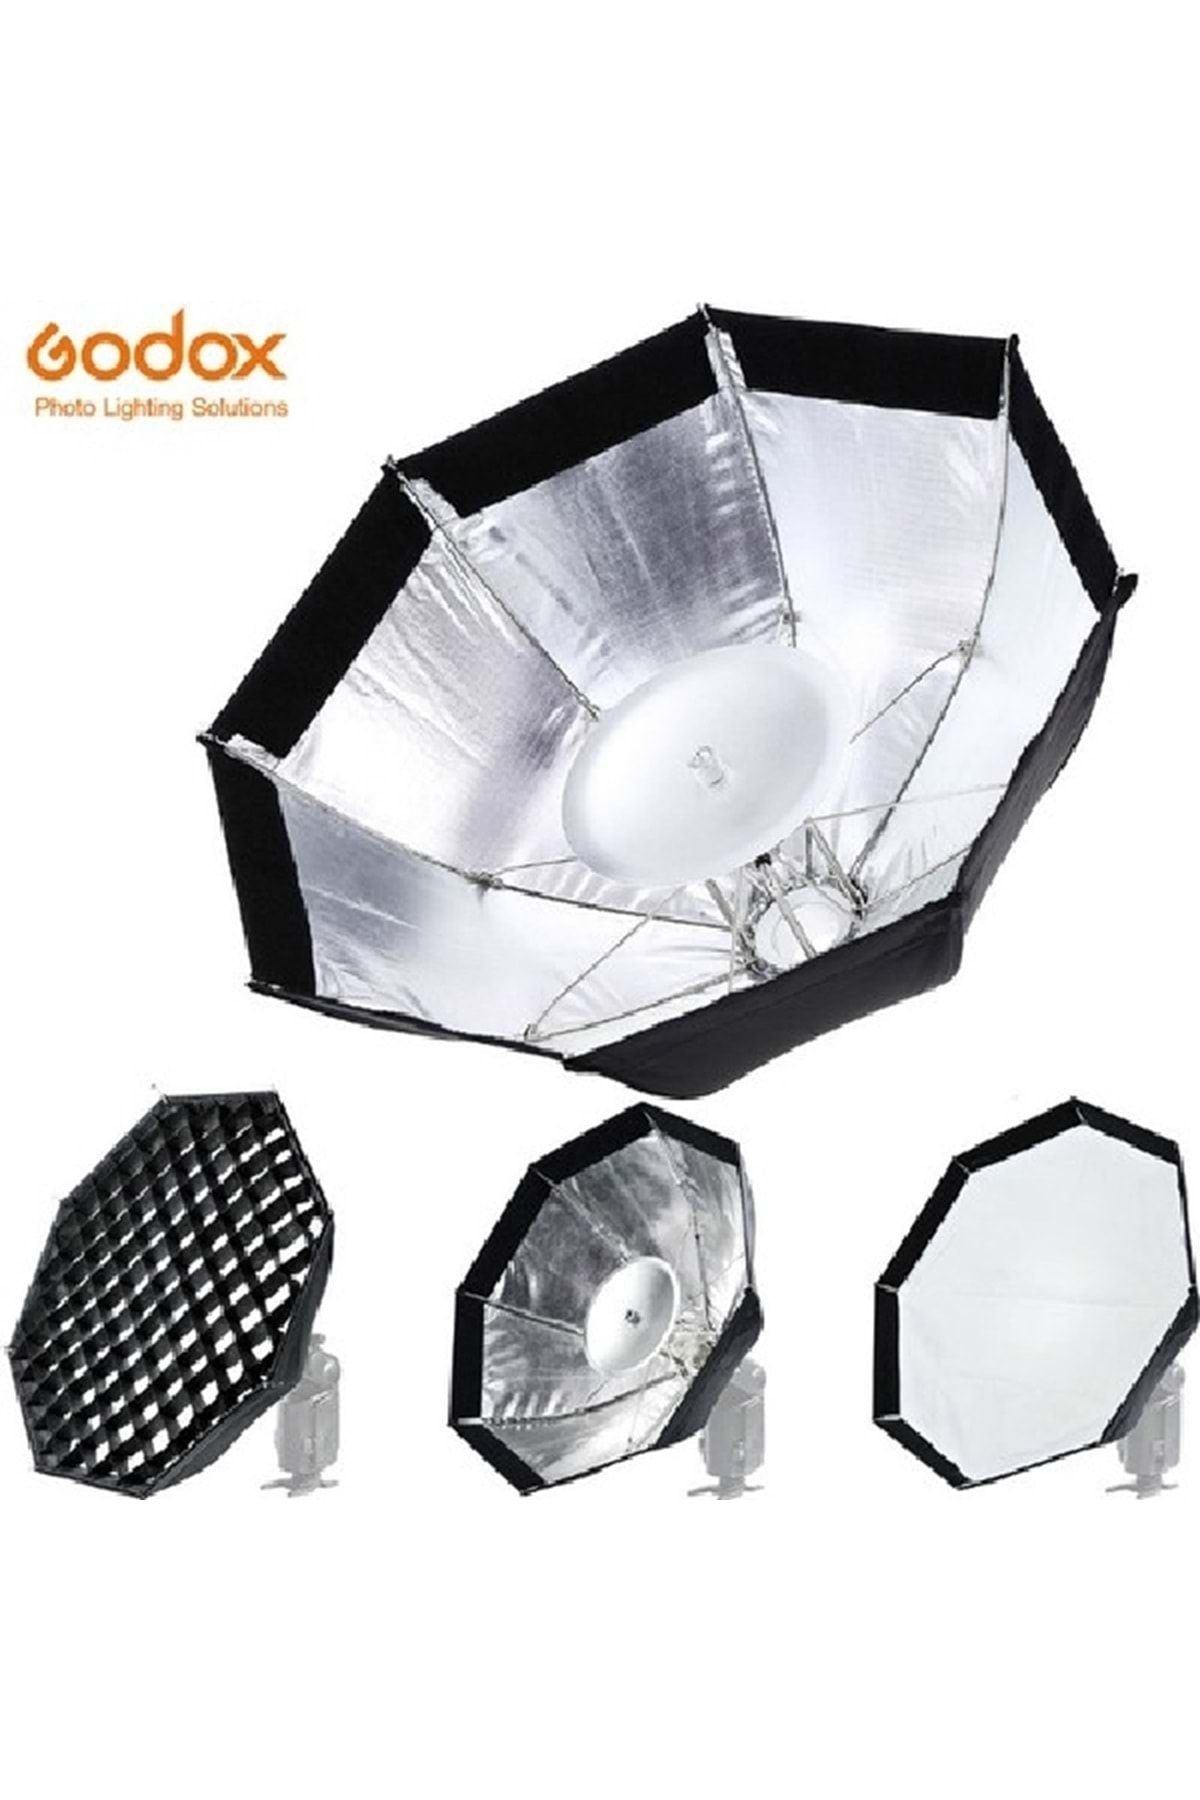 Godox Ad-s7 48cm 18'' Softbox For For Wıtstro Flash Ad180-200-360